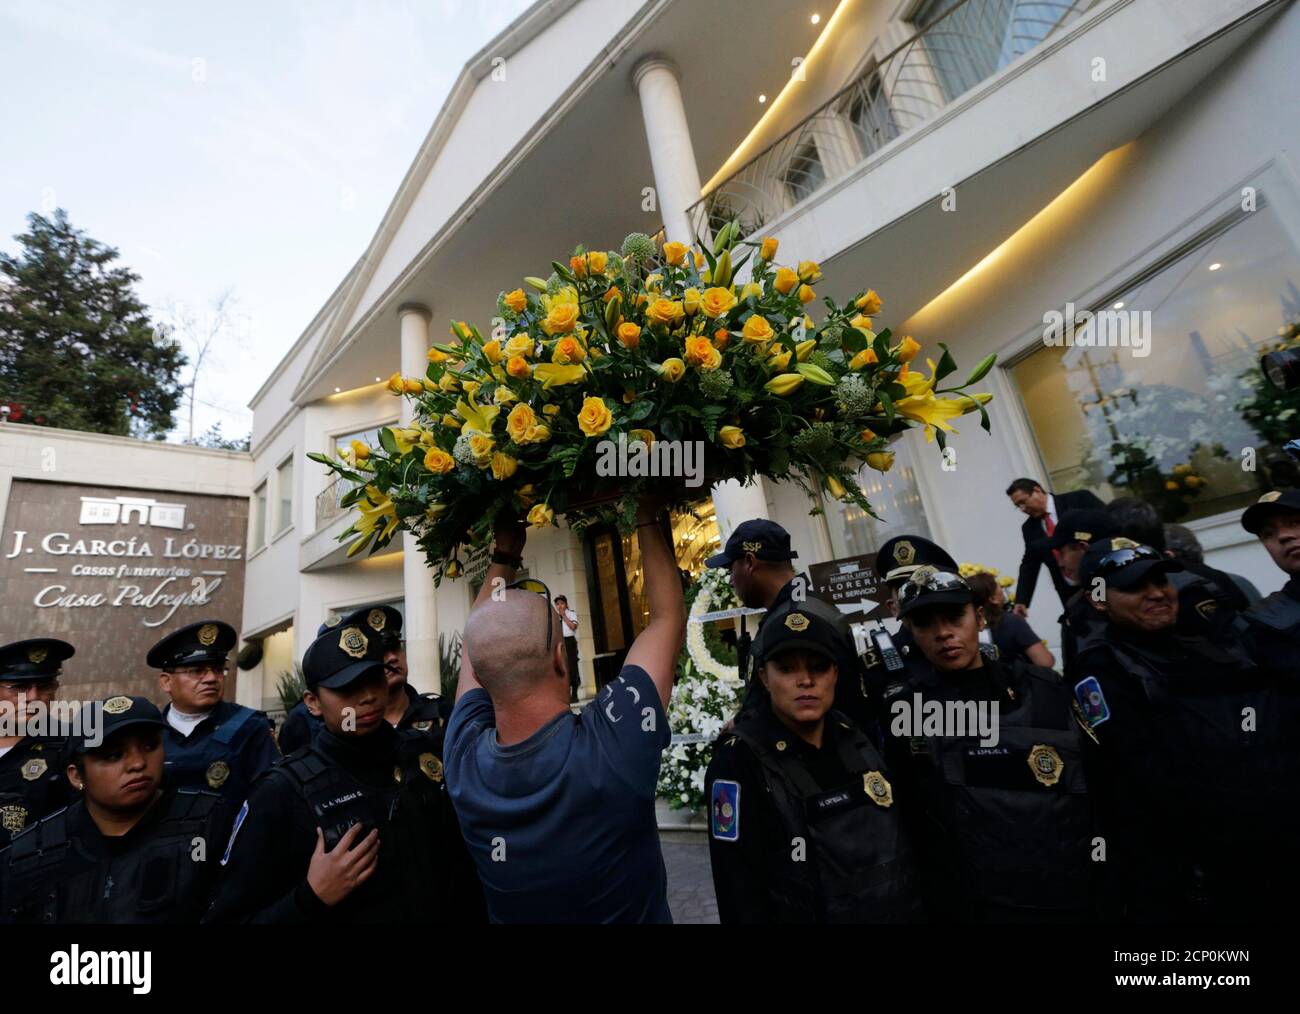 A man carries a flower wreath while passing through a line of police officers outside the funeral home where the body of Colombian Nobel Prize laureate Gabriel Garcia Marquez was taken to, in Mexico City April 17, 2014. Garcia Marquez, the Colombian author whose beguiling stories of love and longing brought Latin America to life for millions of readers and put magical realism on the literary map, died on Thursday. He was 87. Fans will pay their last respects to him in the Palace of Fine Arts in Mexico City on Monday and he will be cremated in a private ceremony. REUTERS/Henry Romero (MEXICO  - Stock Photo